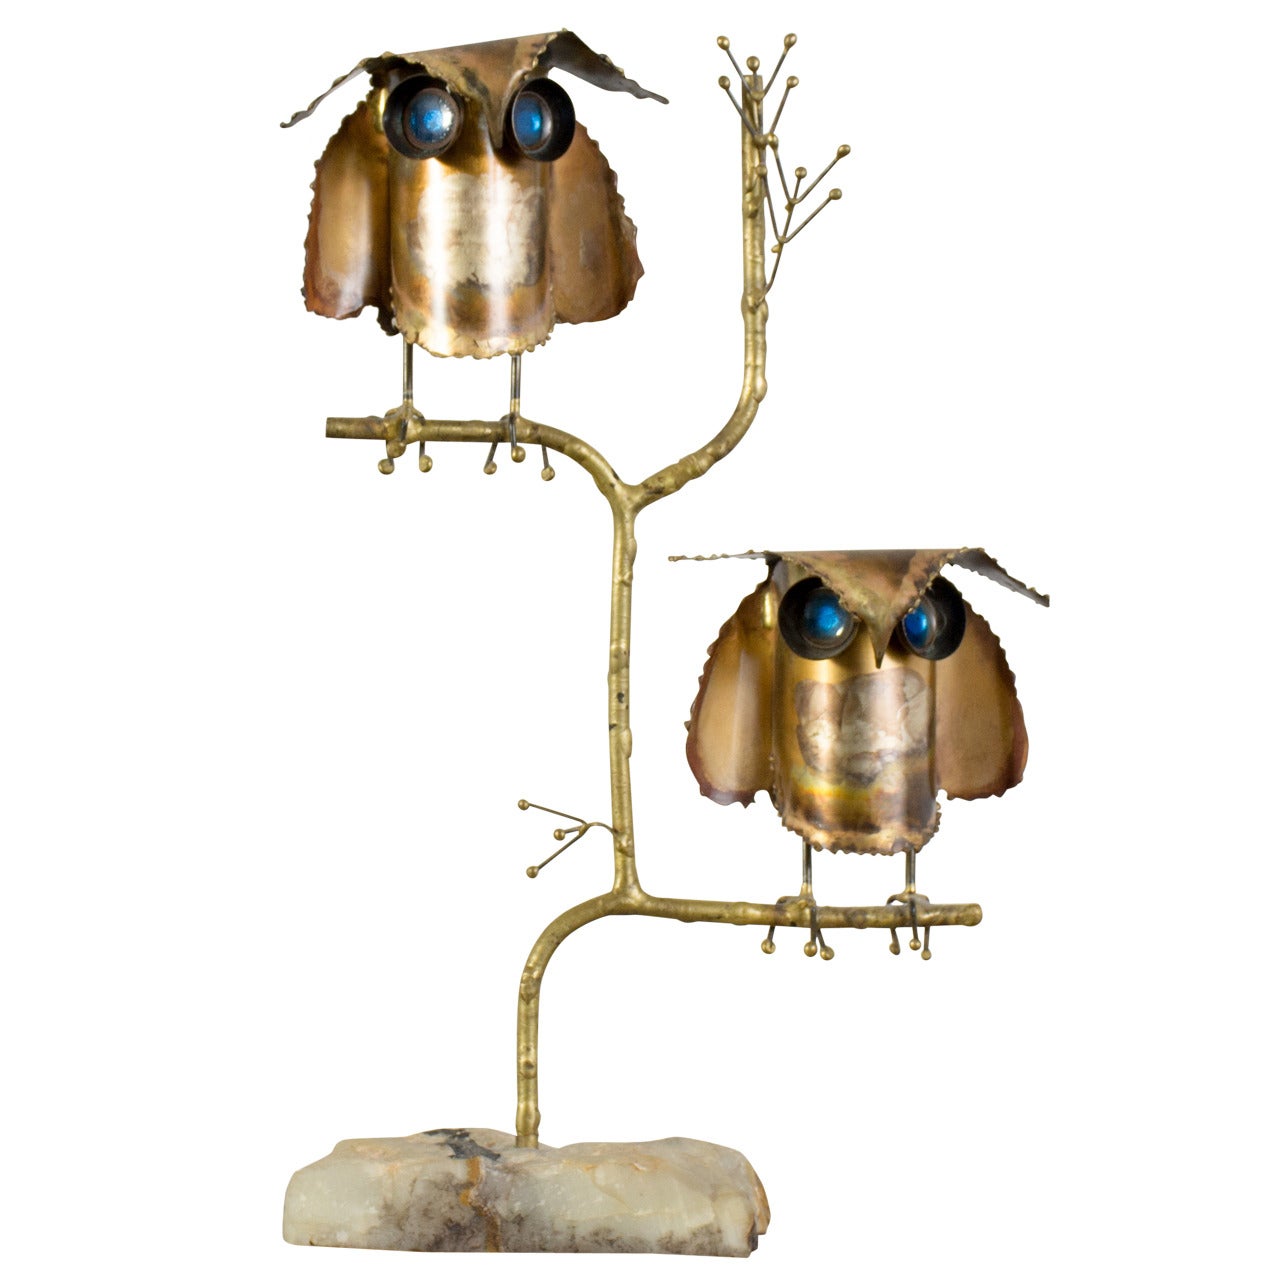 Vintage Mid-Century Owl Sculpture by Curtis Jere, 1967